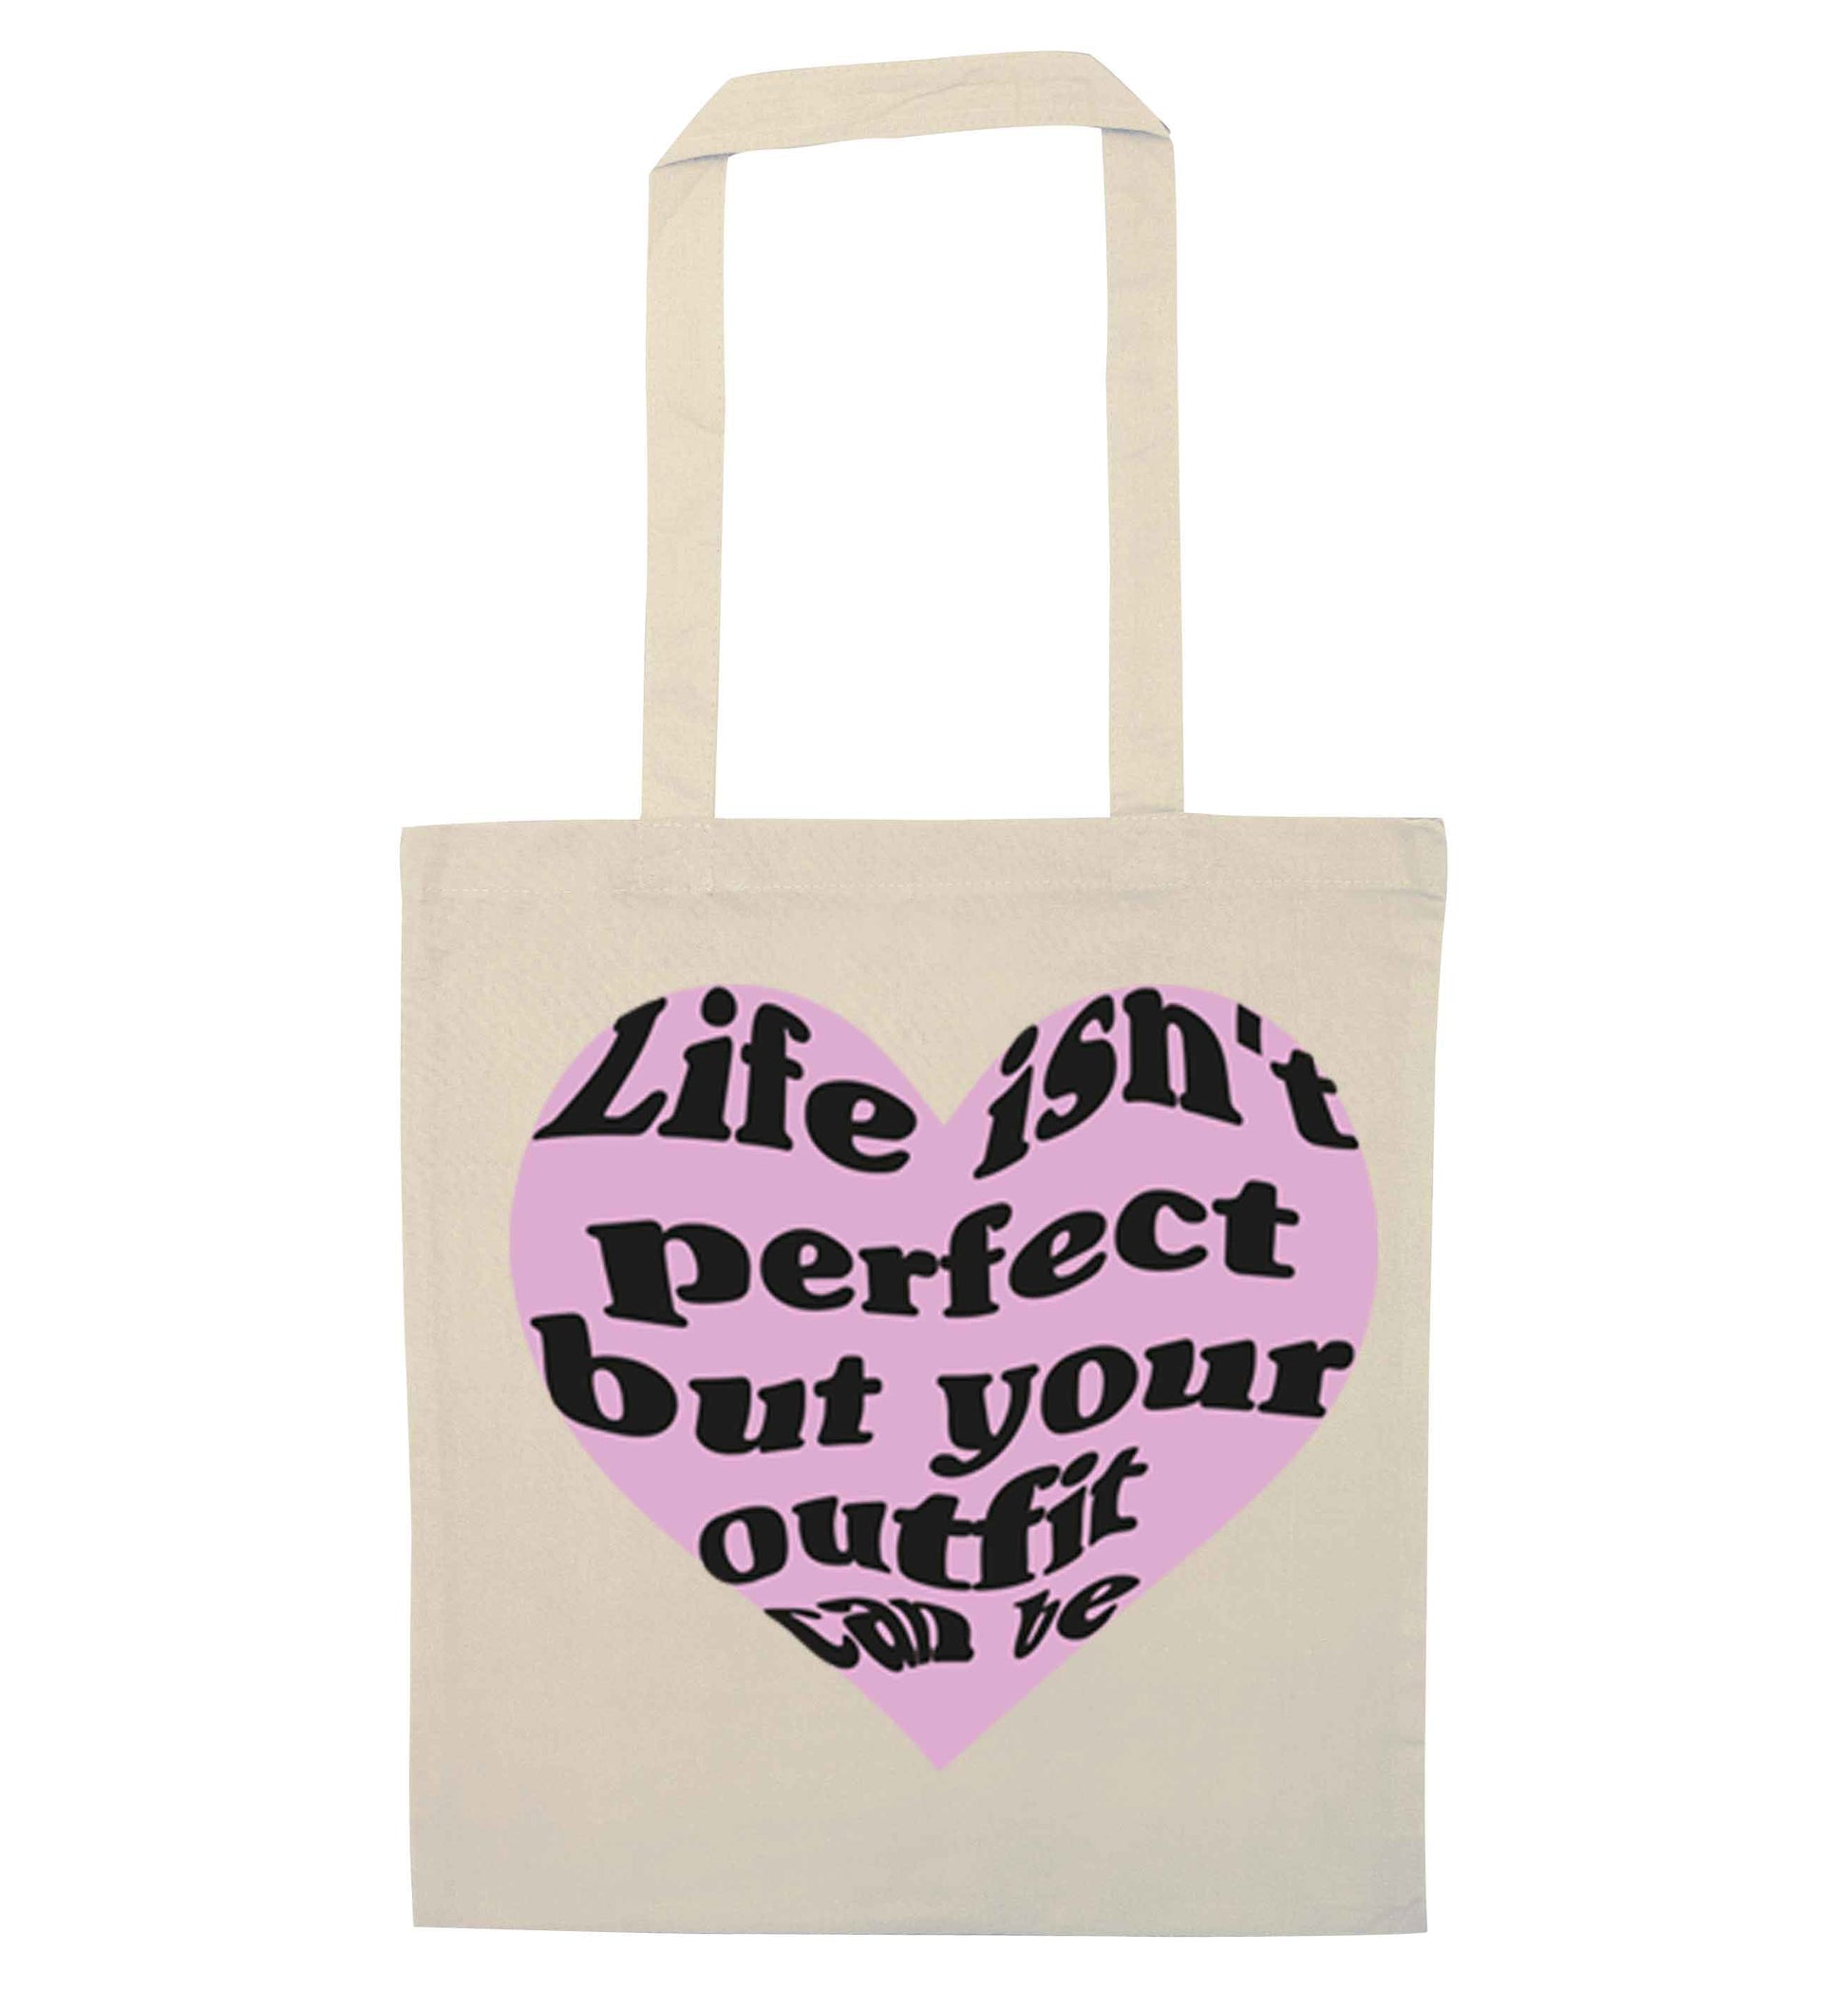 Life isn't perfect but your outfit can be natural tote bag